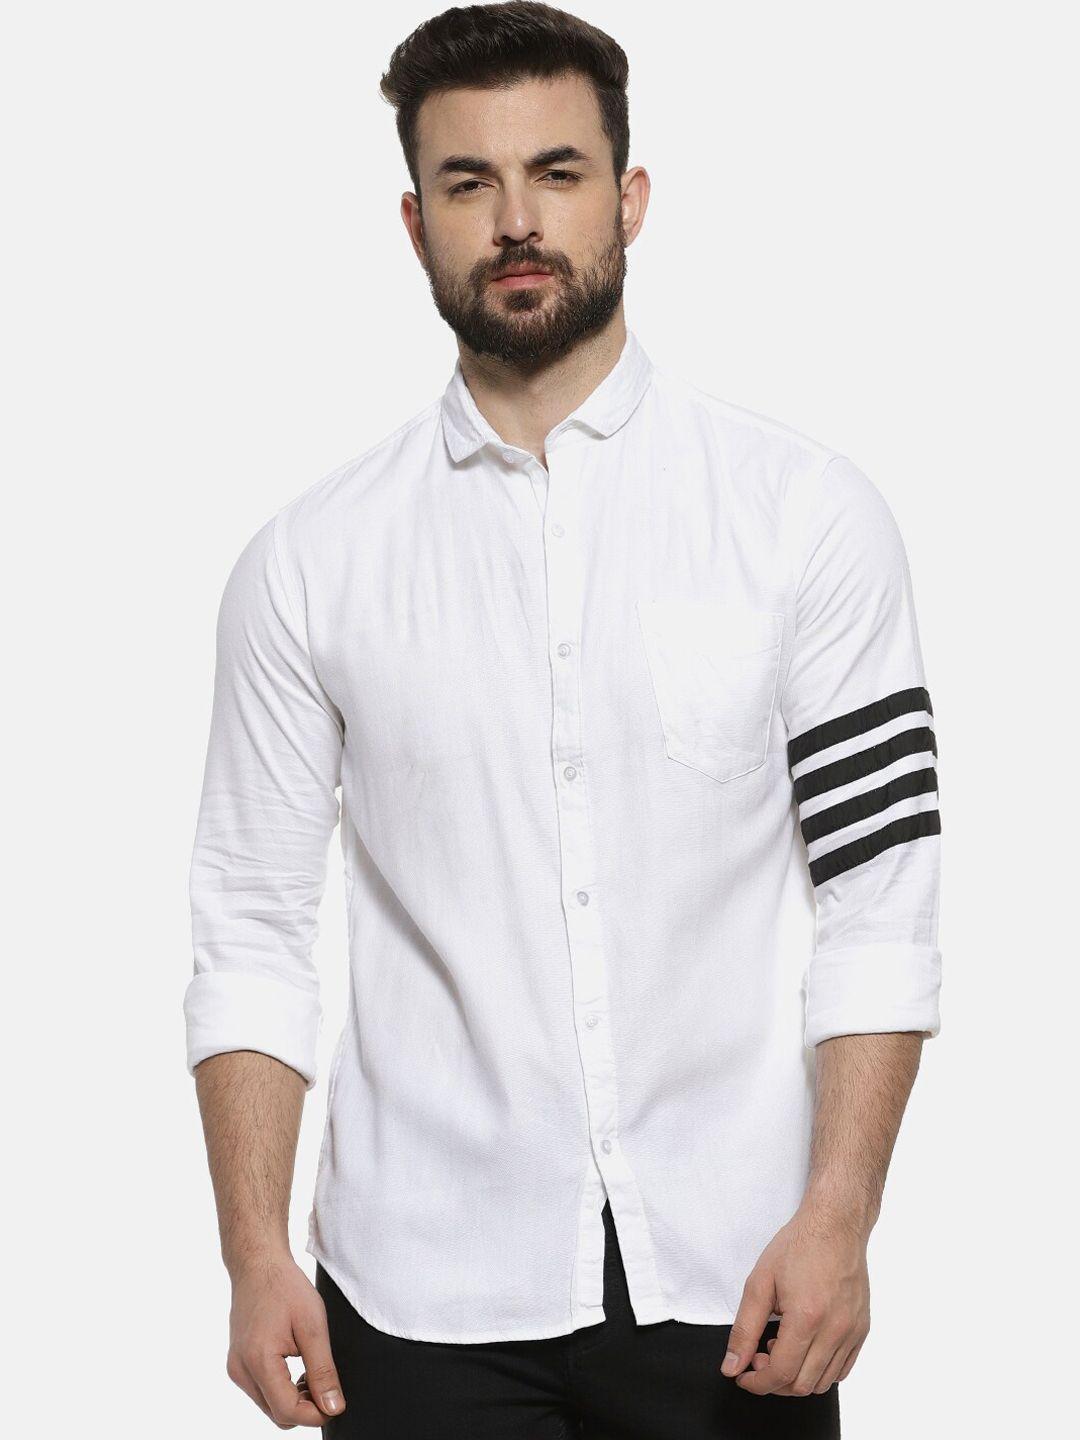 campus sutra men white regular fit solid casual shirt